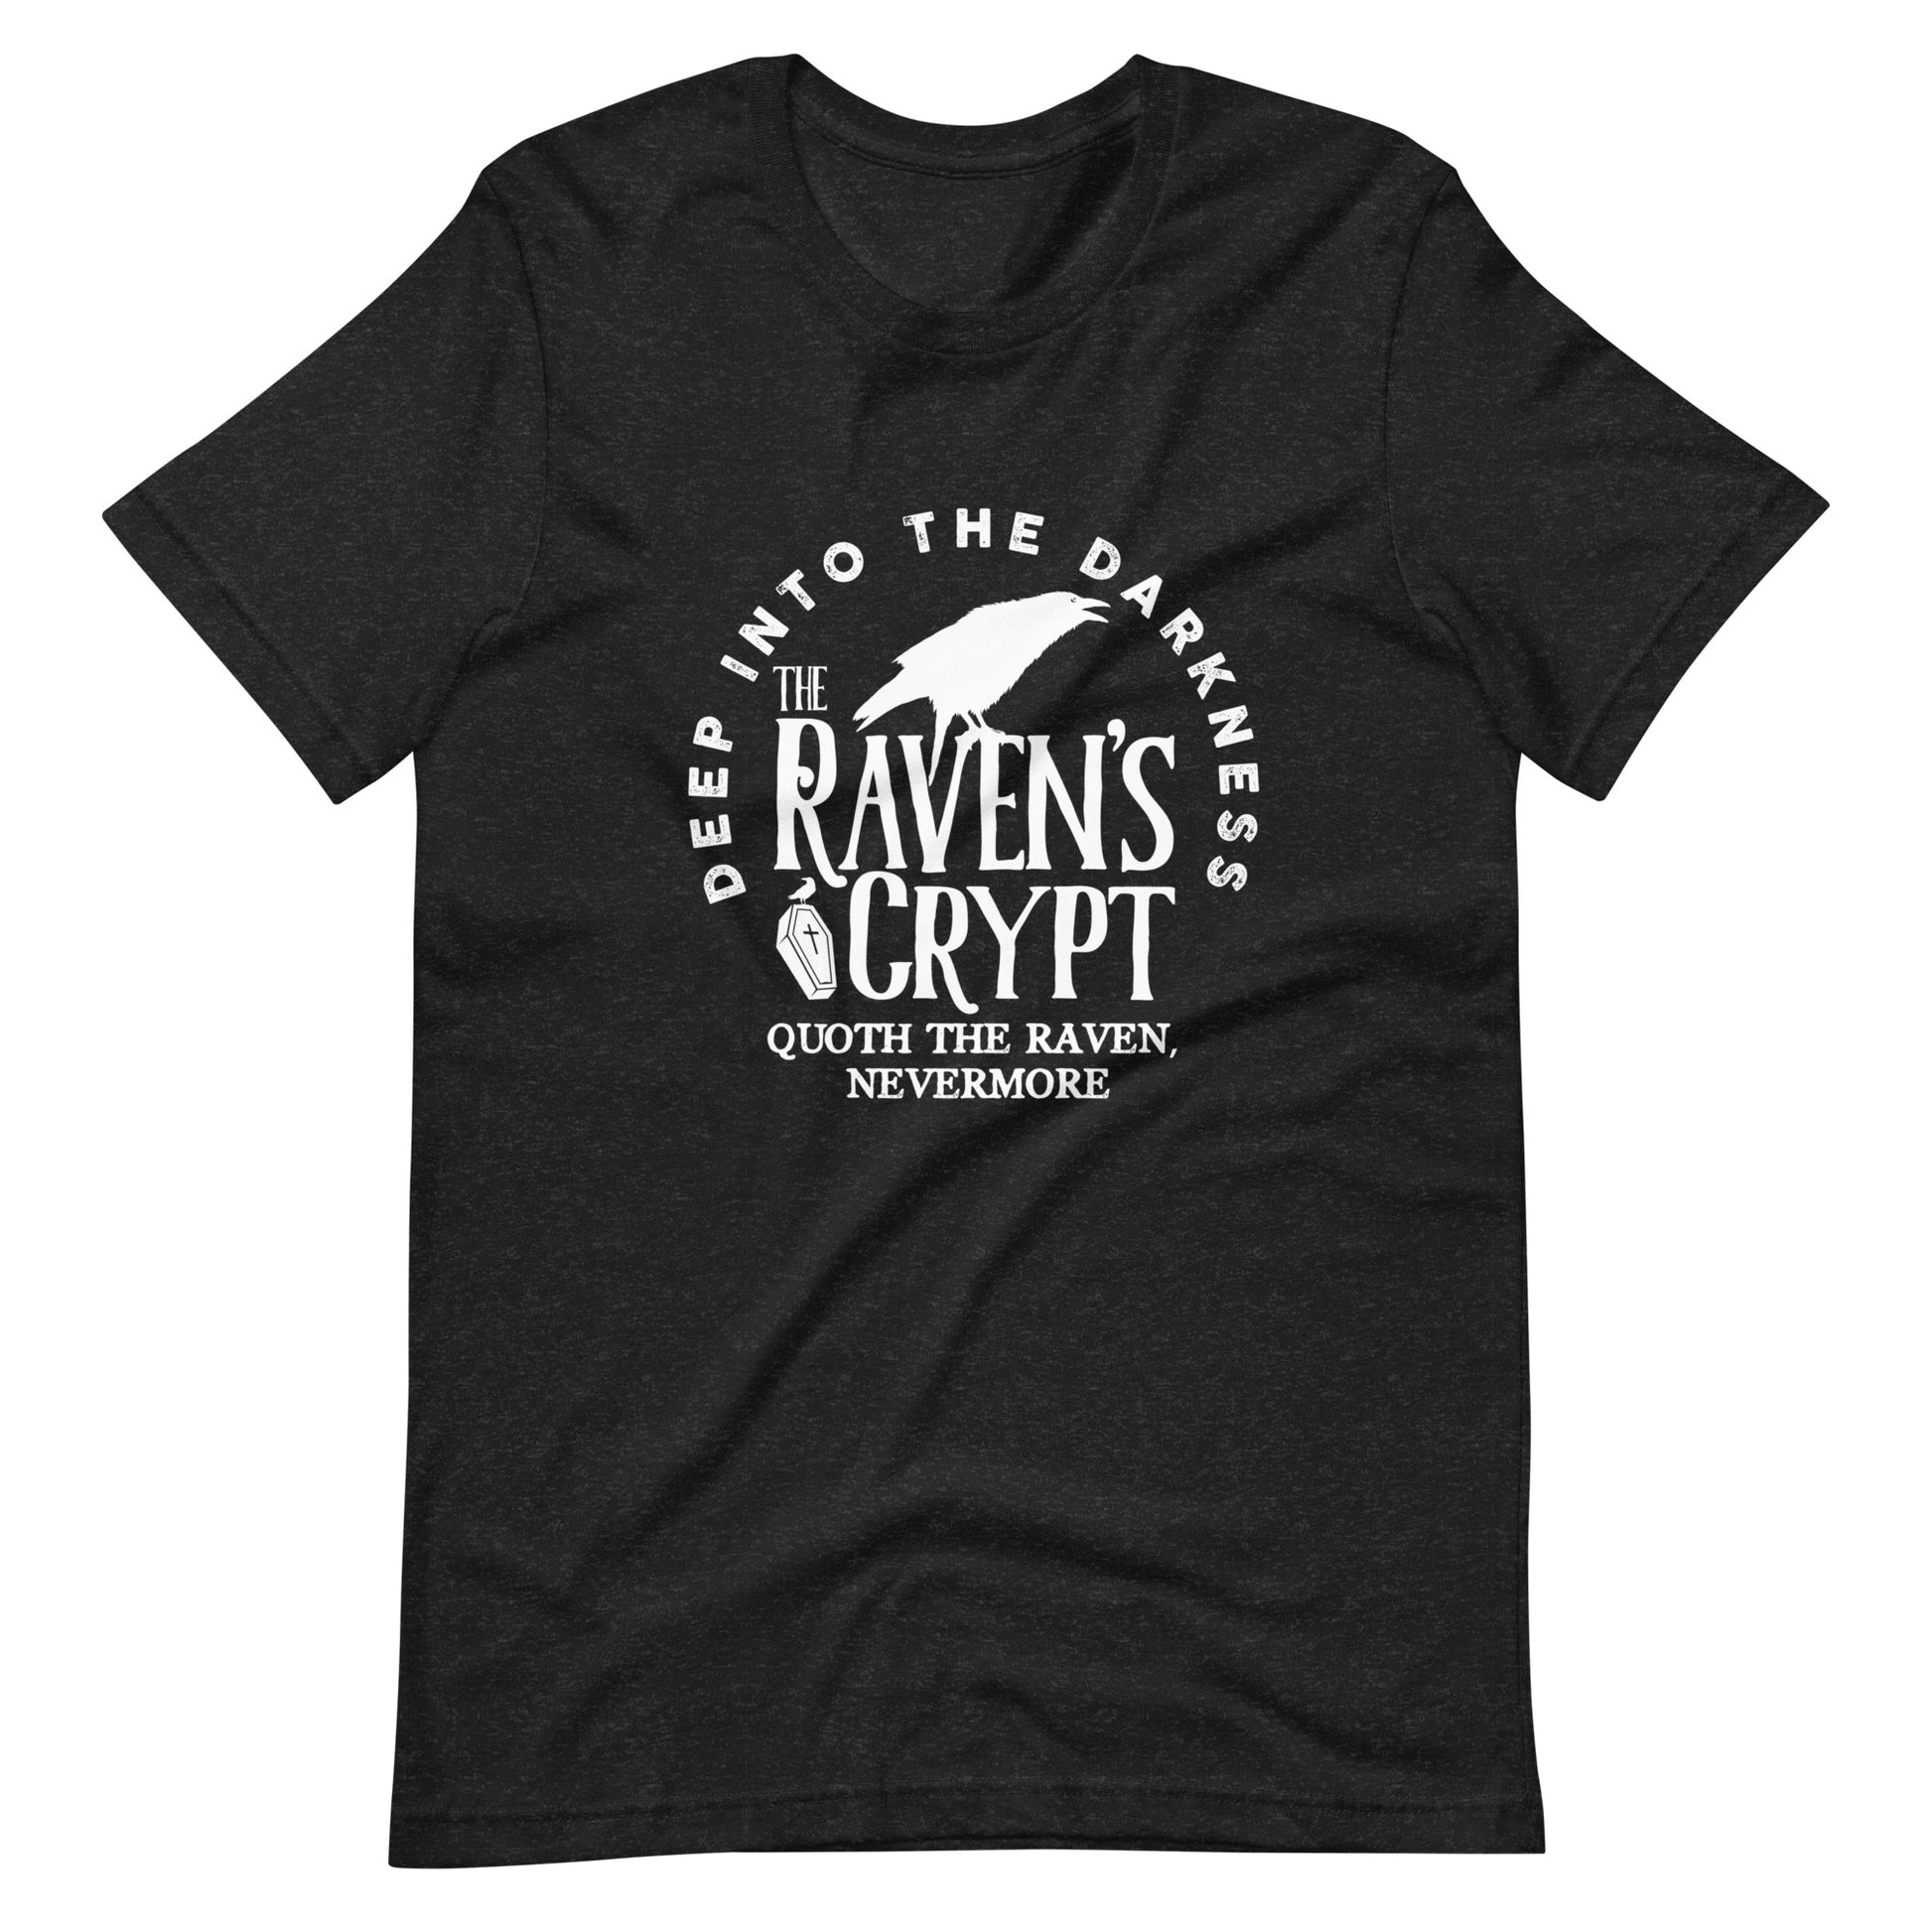 Deep Into the Darkness The Raven's Crypt - Men's t-shirt- Black Heather Front